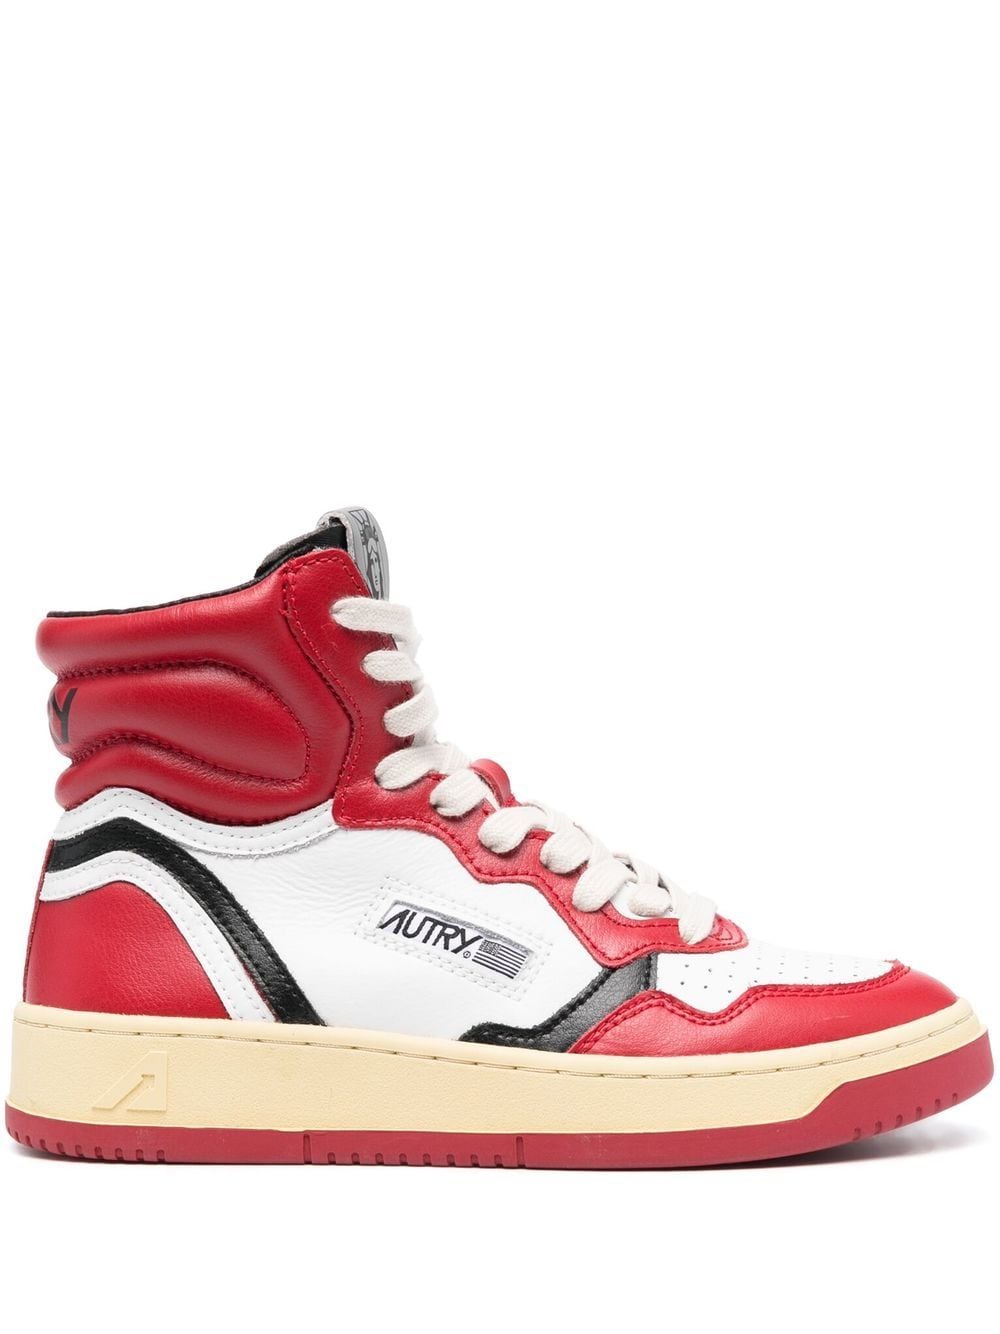 Autry logo-print high-top sneakers - Red von Autry